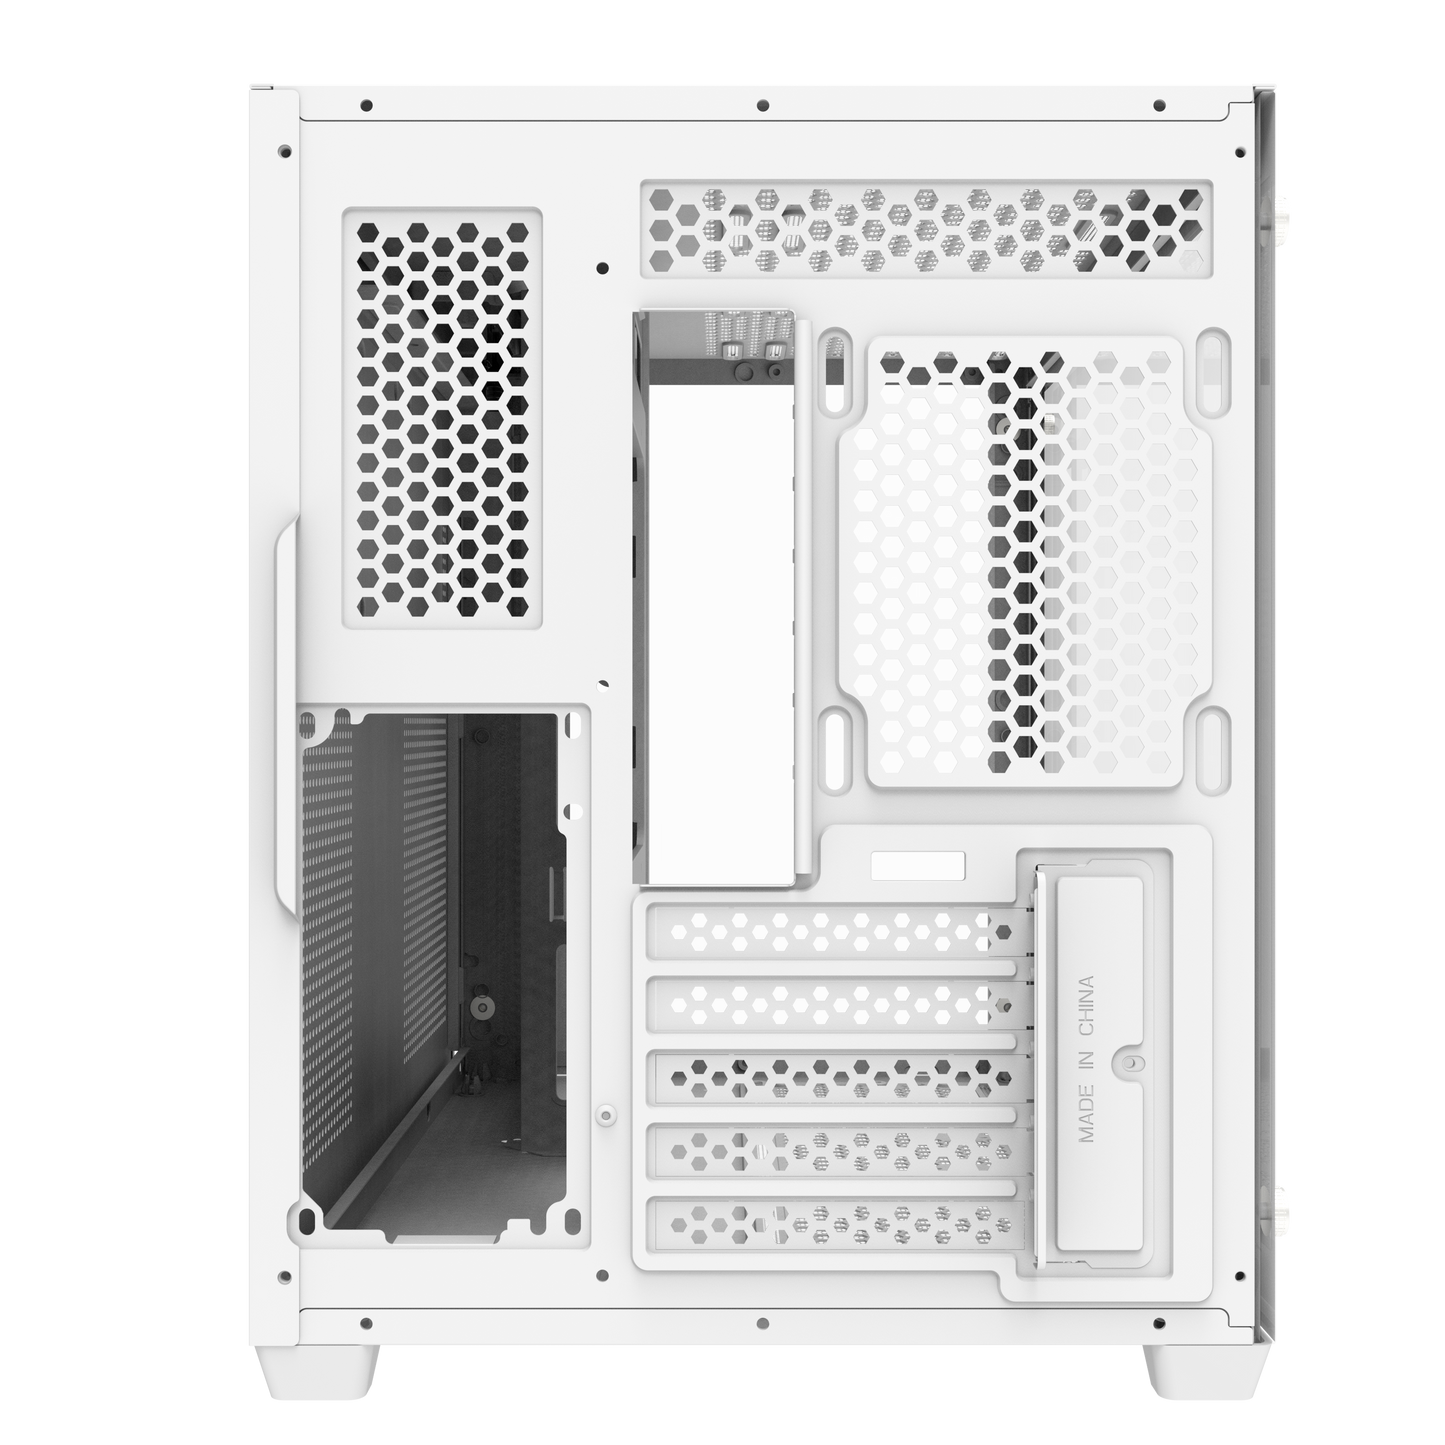 DarkFlash Computer PC CASE Mirco-ATX Tower Tempered Glass Panel without Fan (C285)